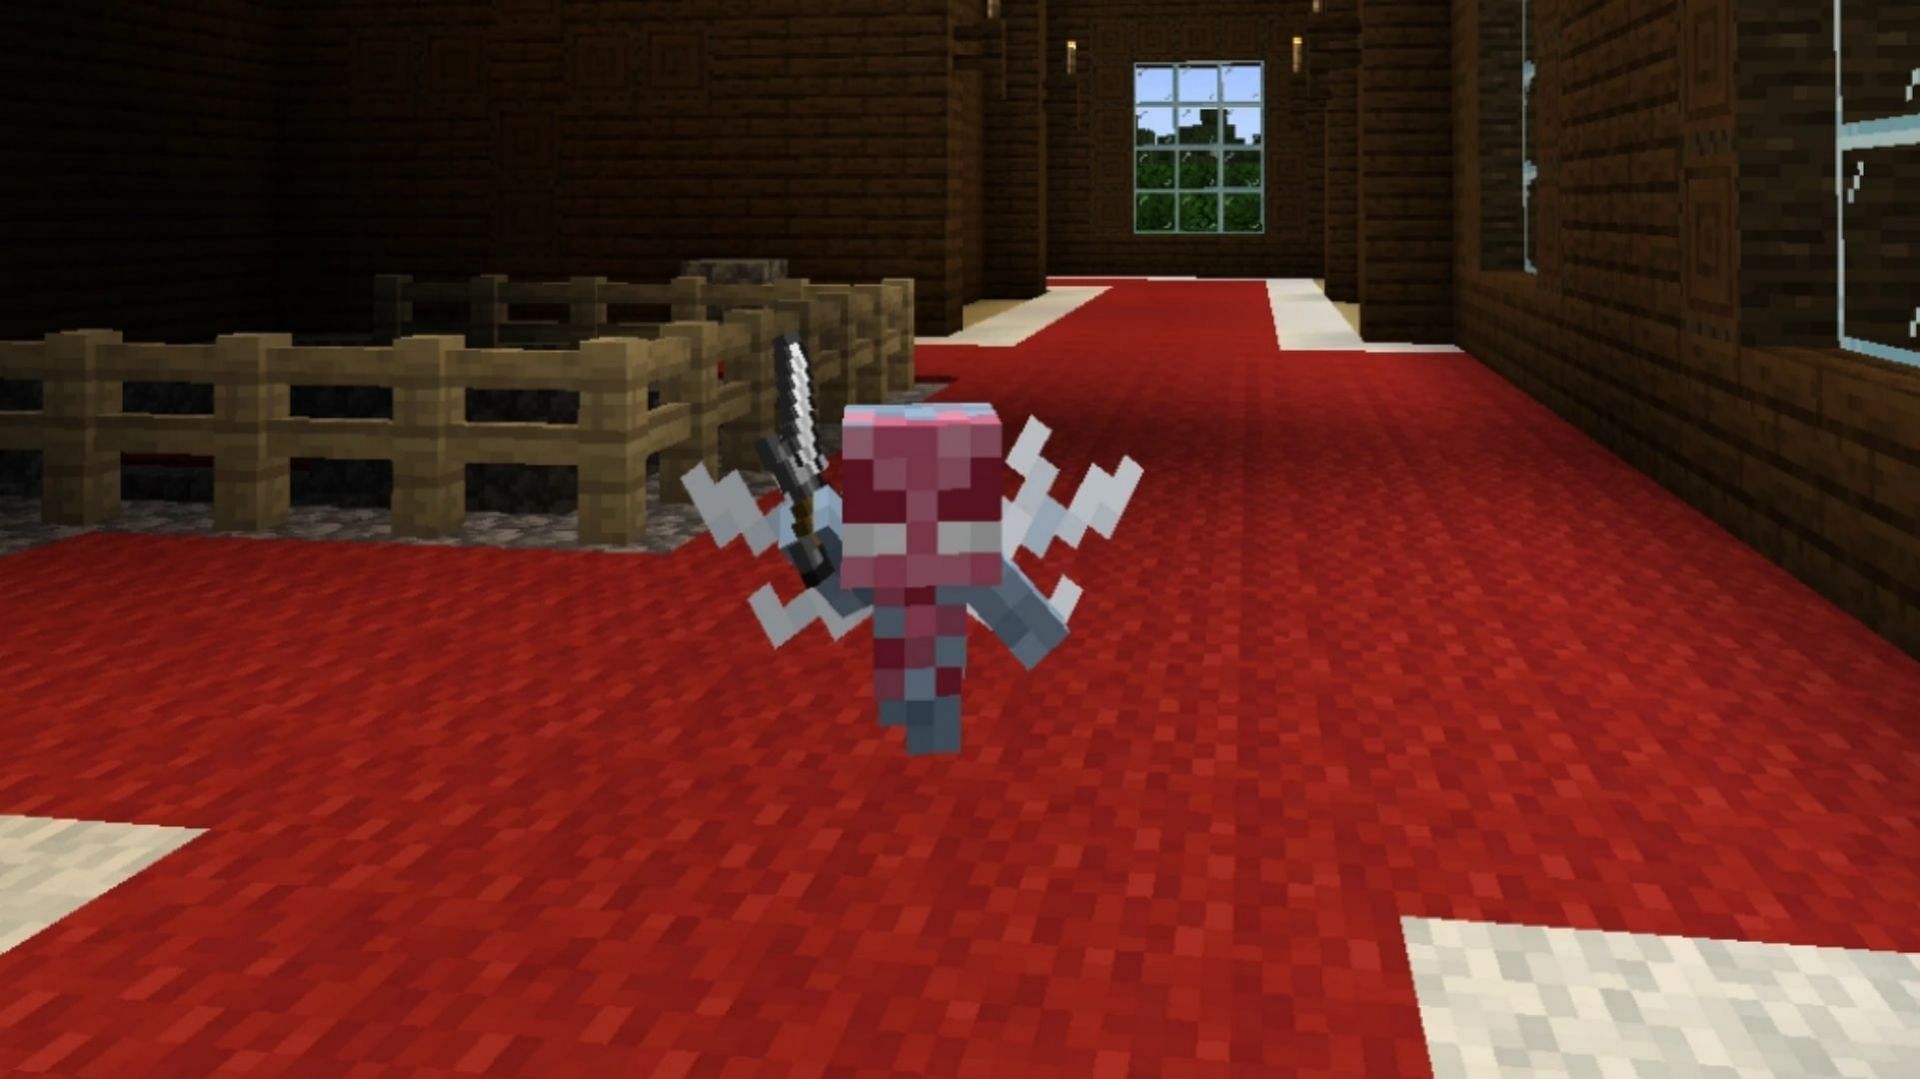 Evokers can spawn vexes, which are quite dangerous and annoying in Minecraft (Image via Mojang)